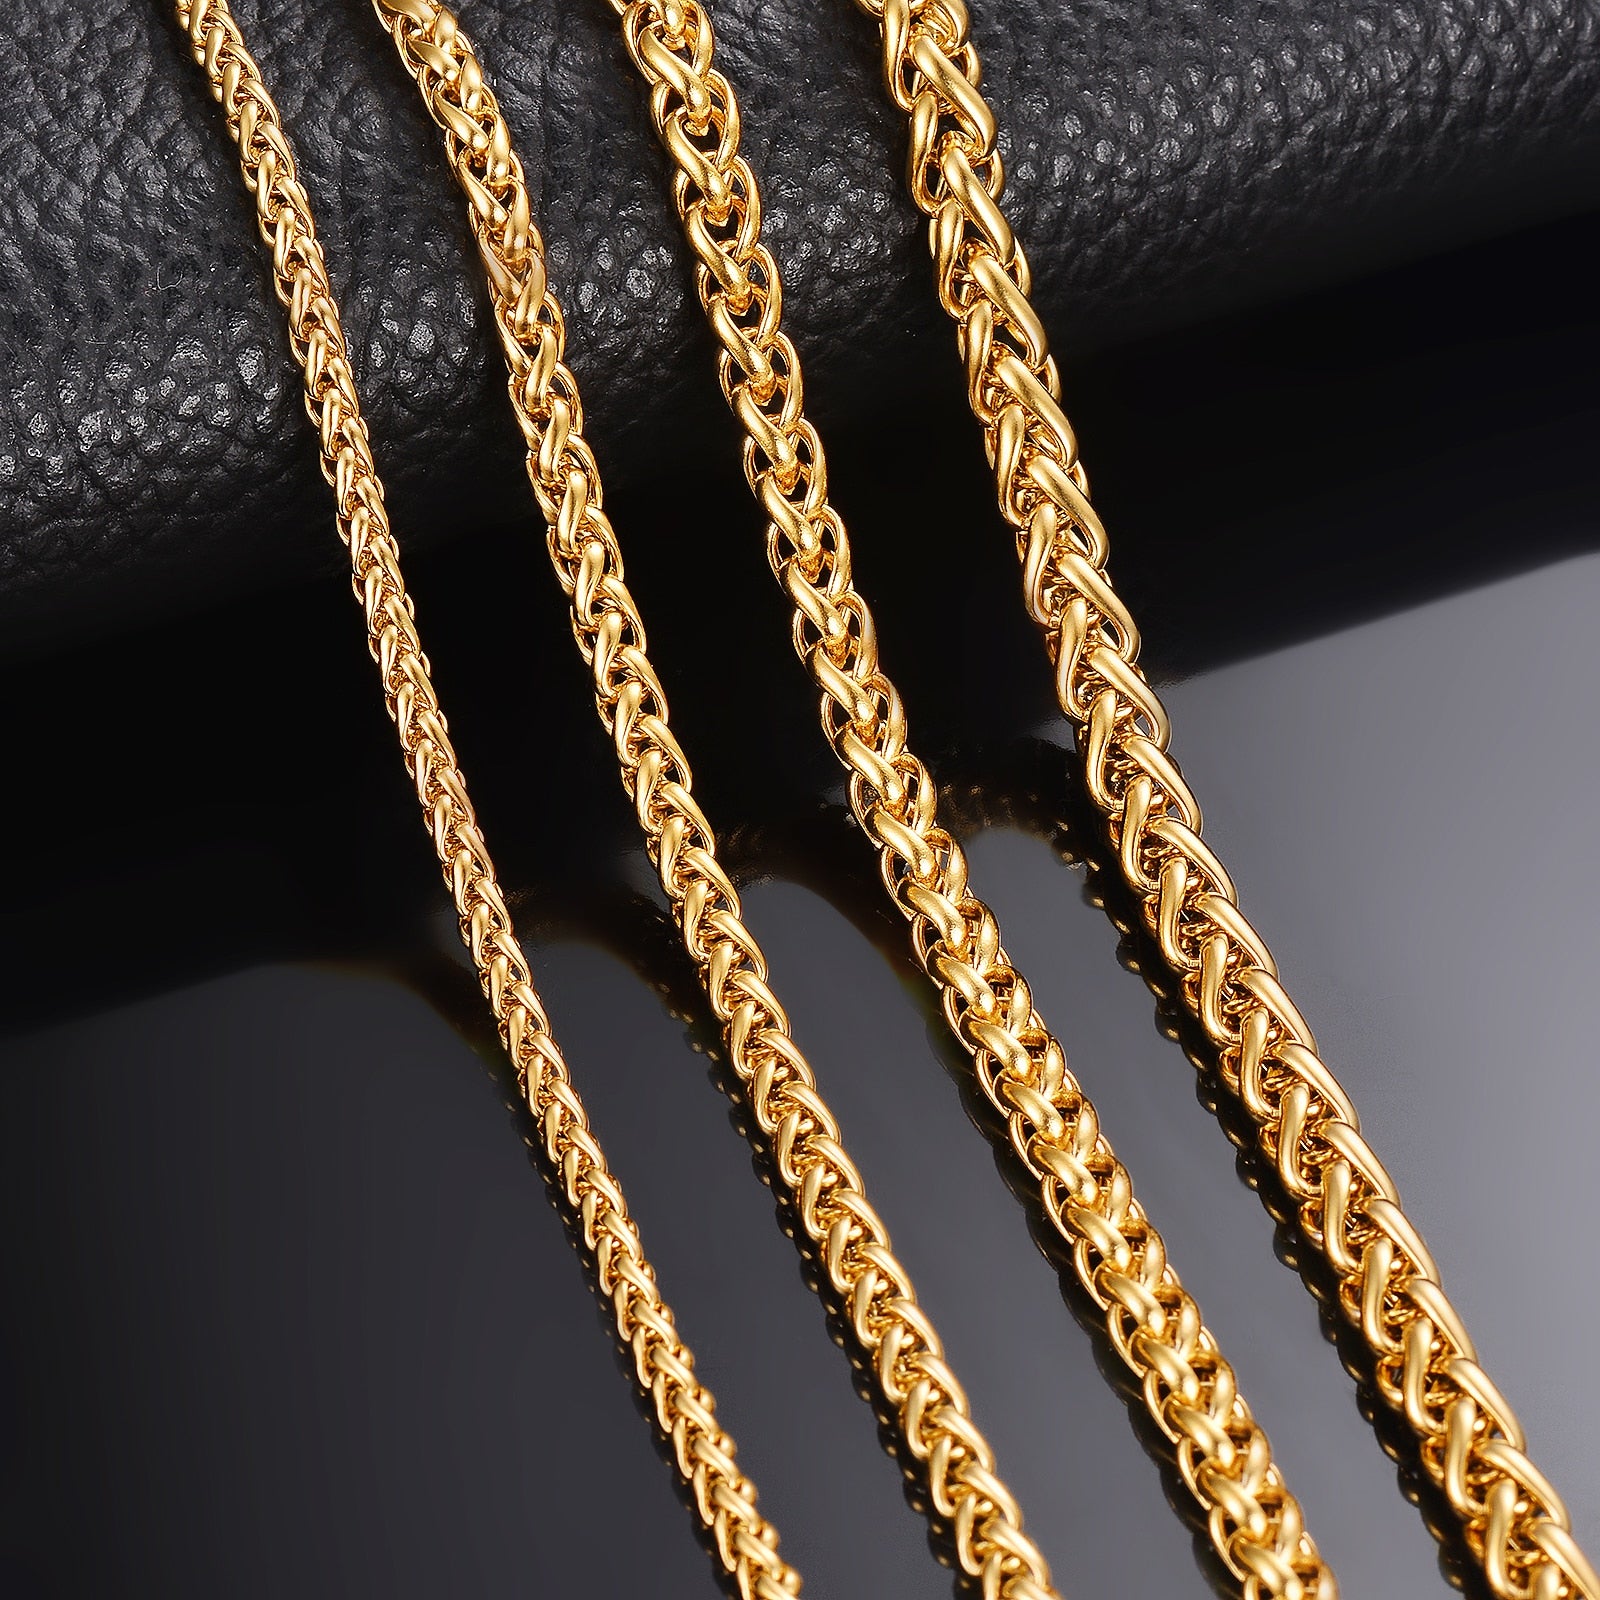 Gold Keel Link Chain Necklace